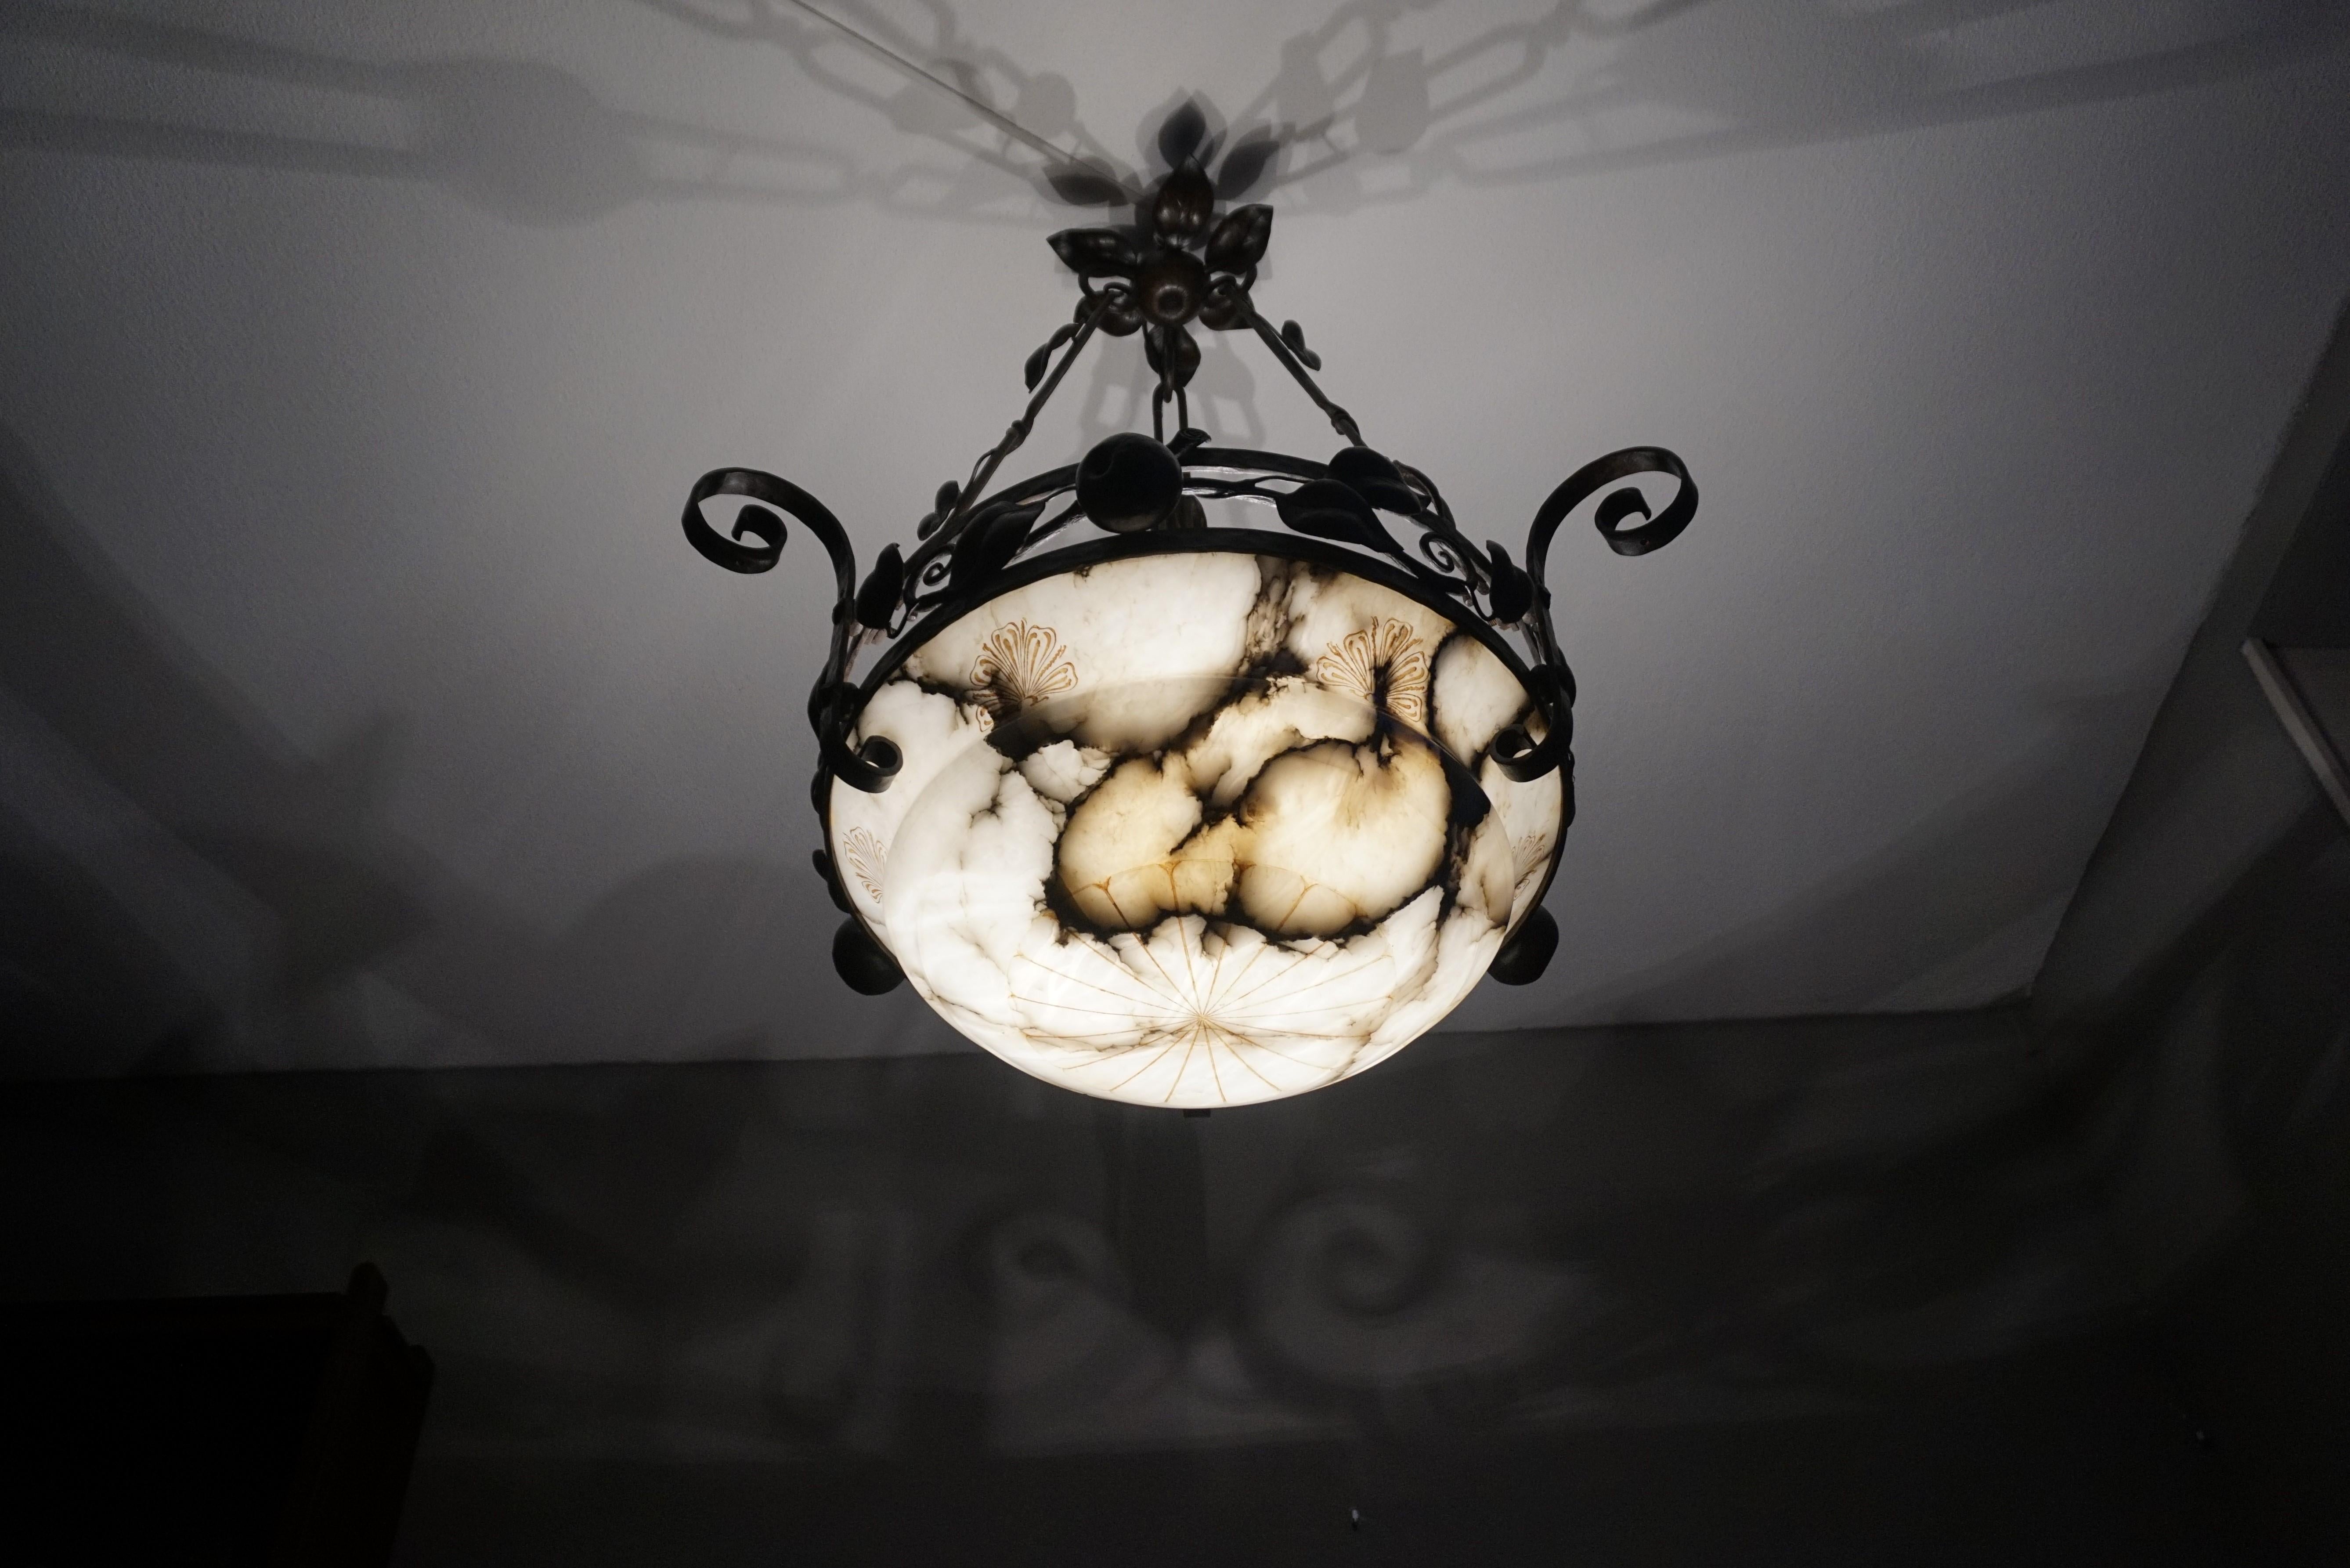 Large Arts and Crafts Alabaster & Wrought Iron Chandelier with Apple Sculptures For Sale 10